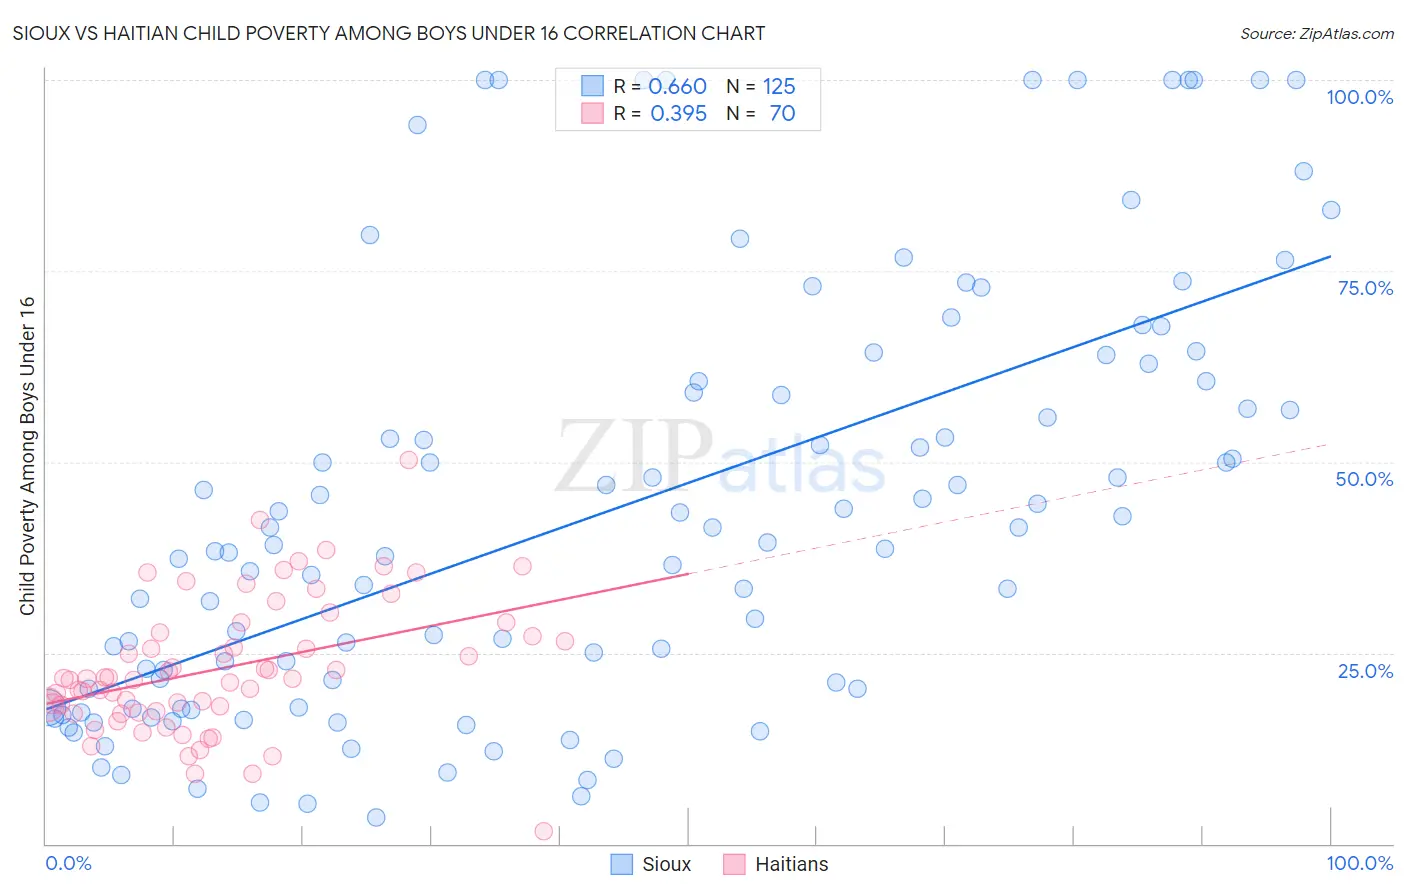 Sioux vs Haitian Child Poverty Among Boys Under 16